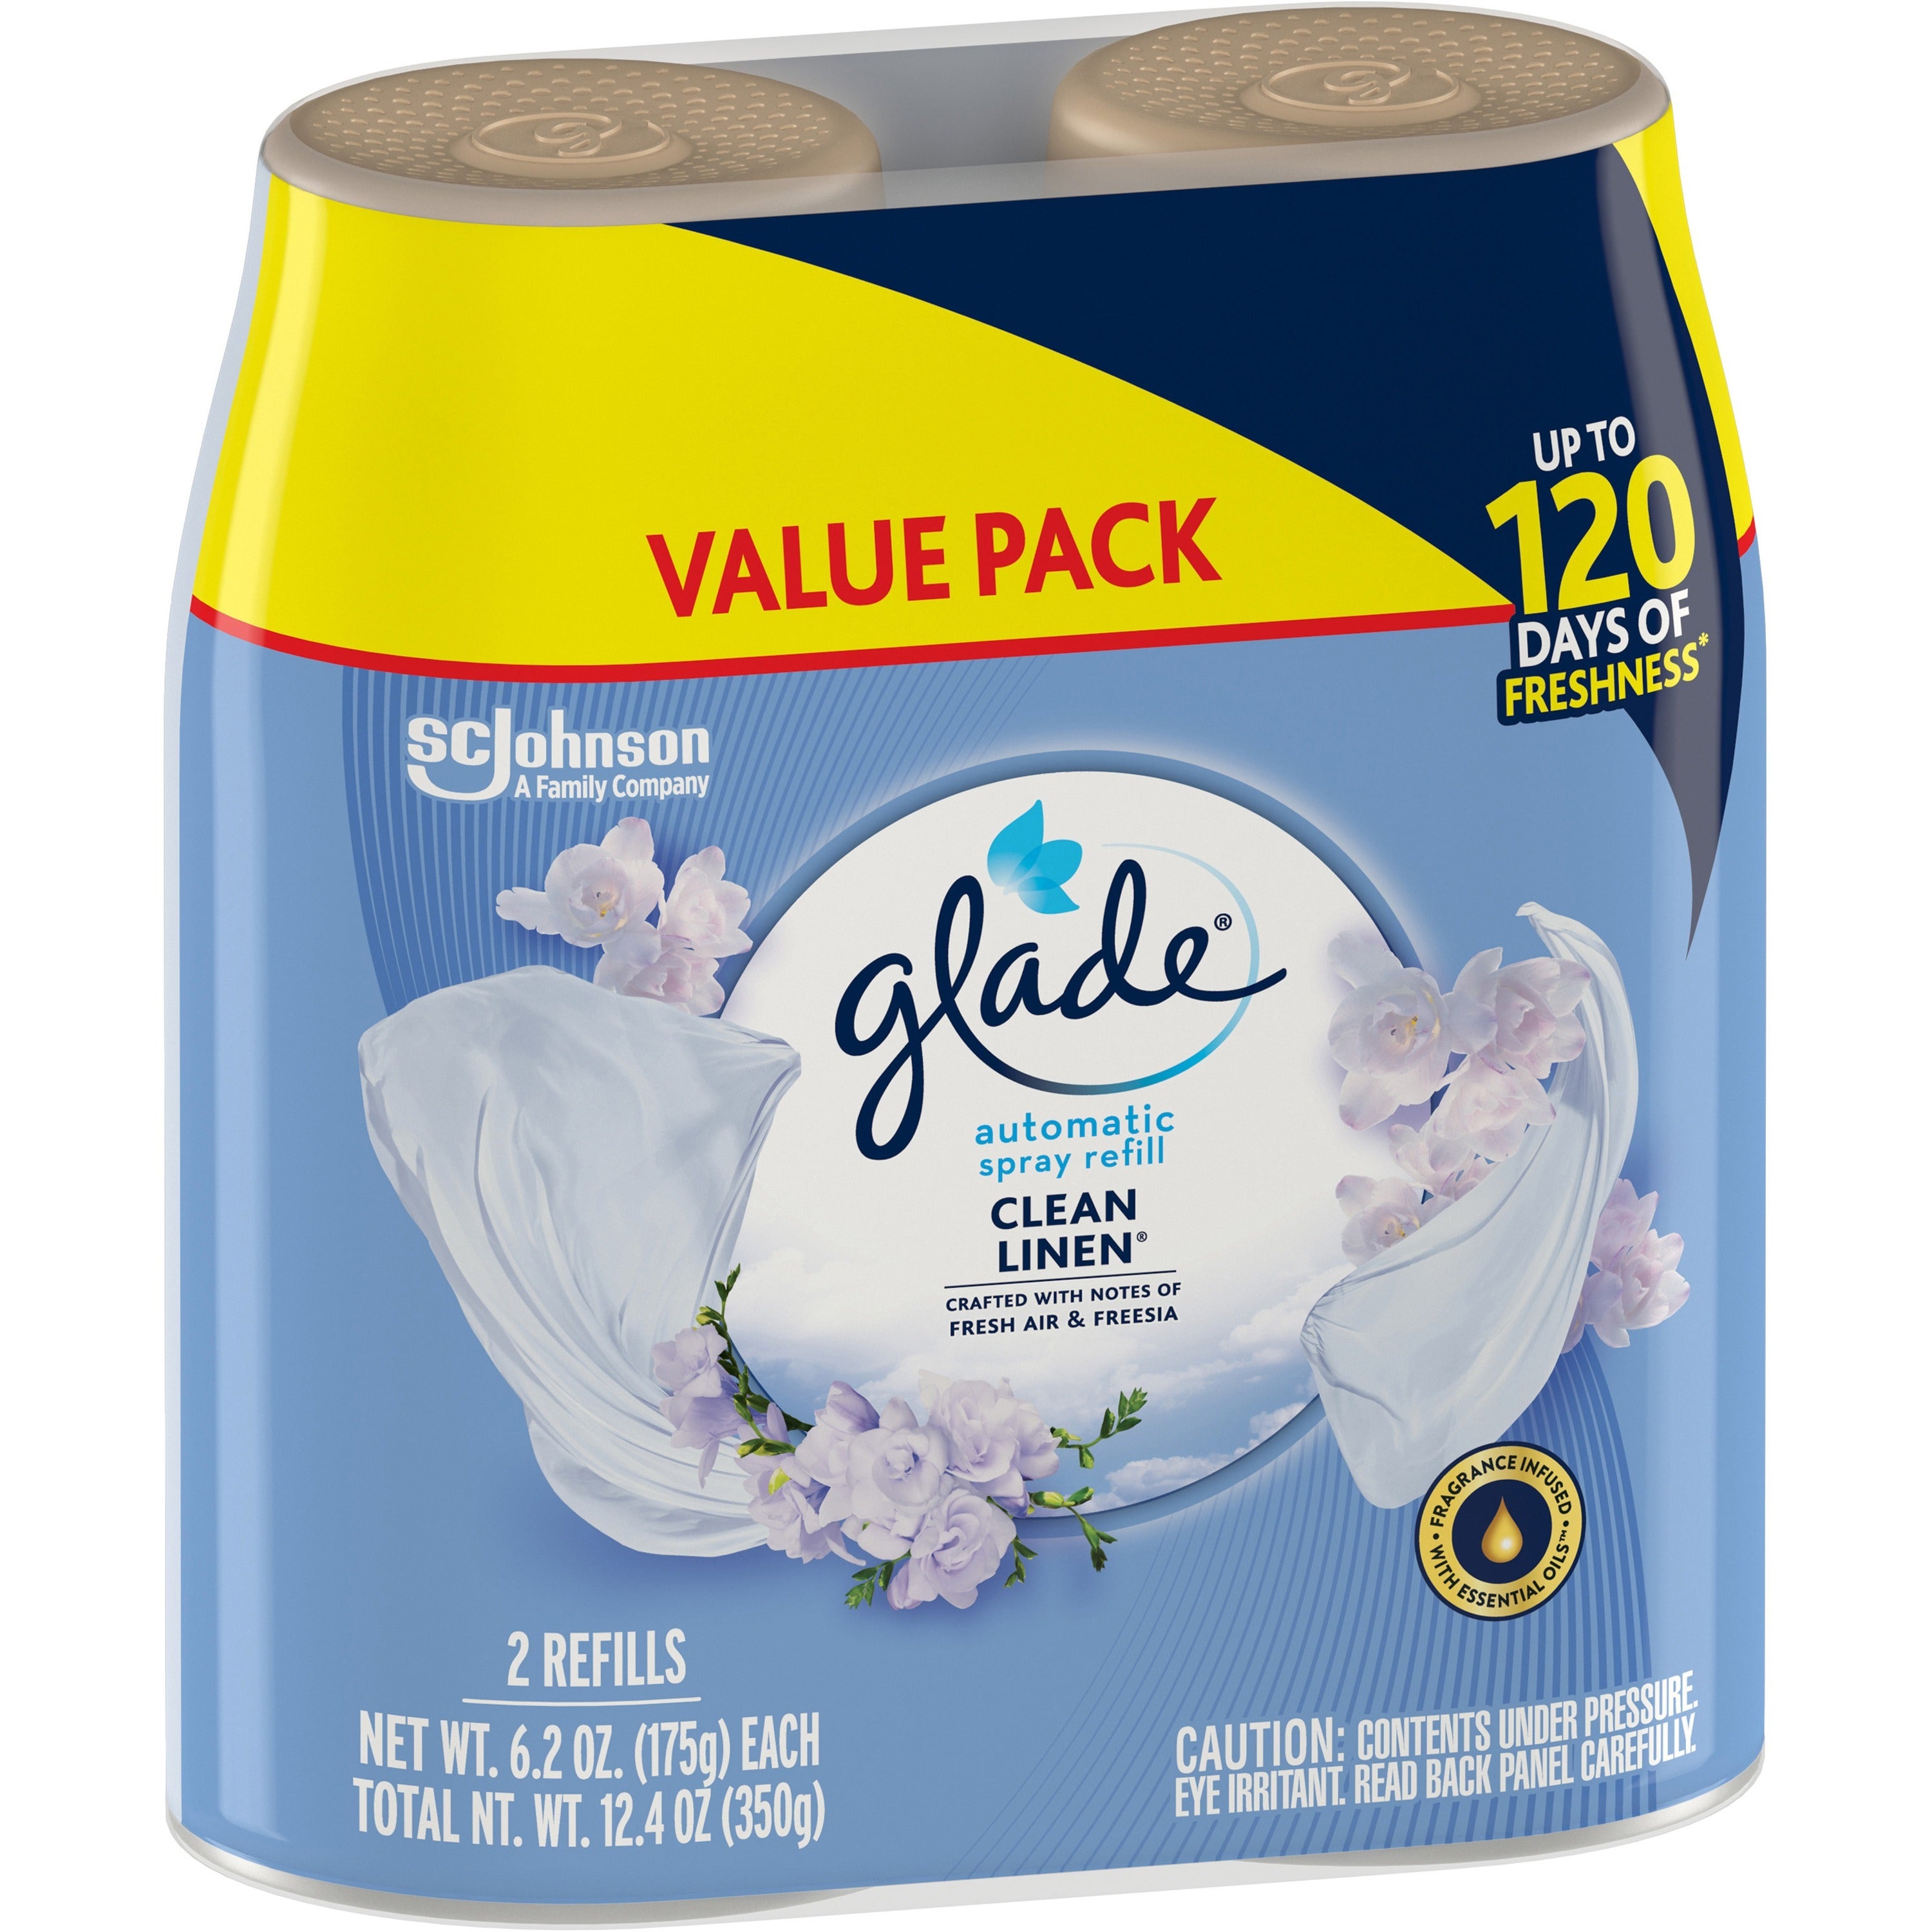 glade-automatic-spray-refill-value-pack-1240-oz-clean-linen-60-day-2-pack-long-lasting-phthalate-free-paraben-free-formaldehyde-free_sjn329388 - 4